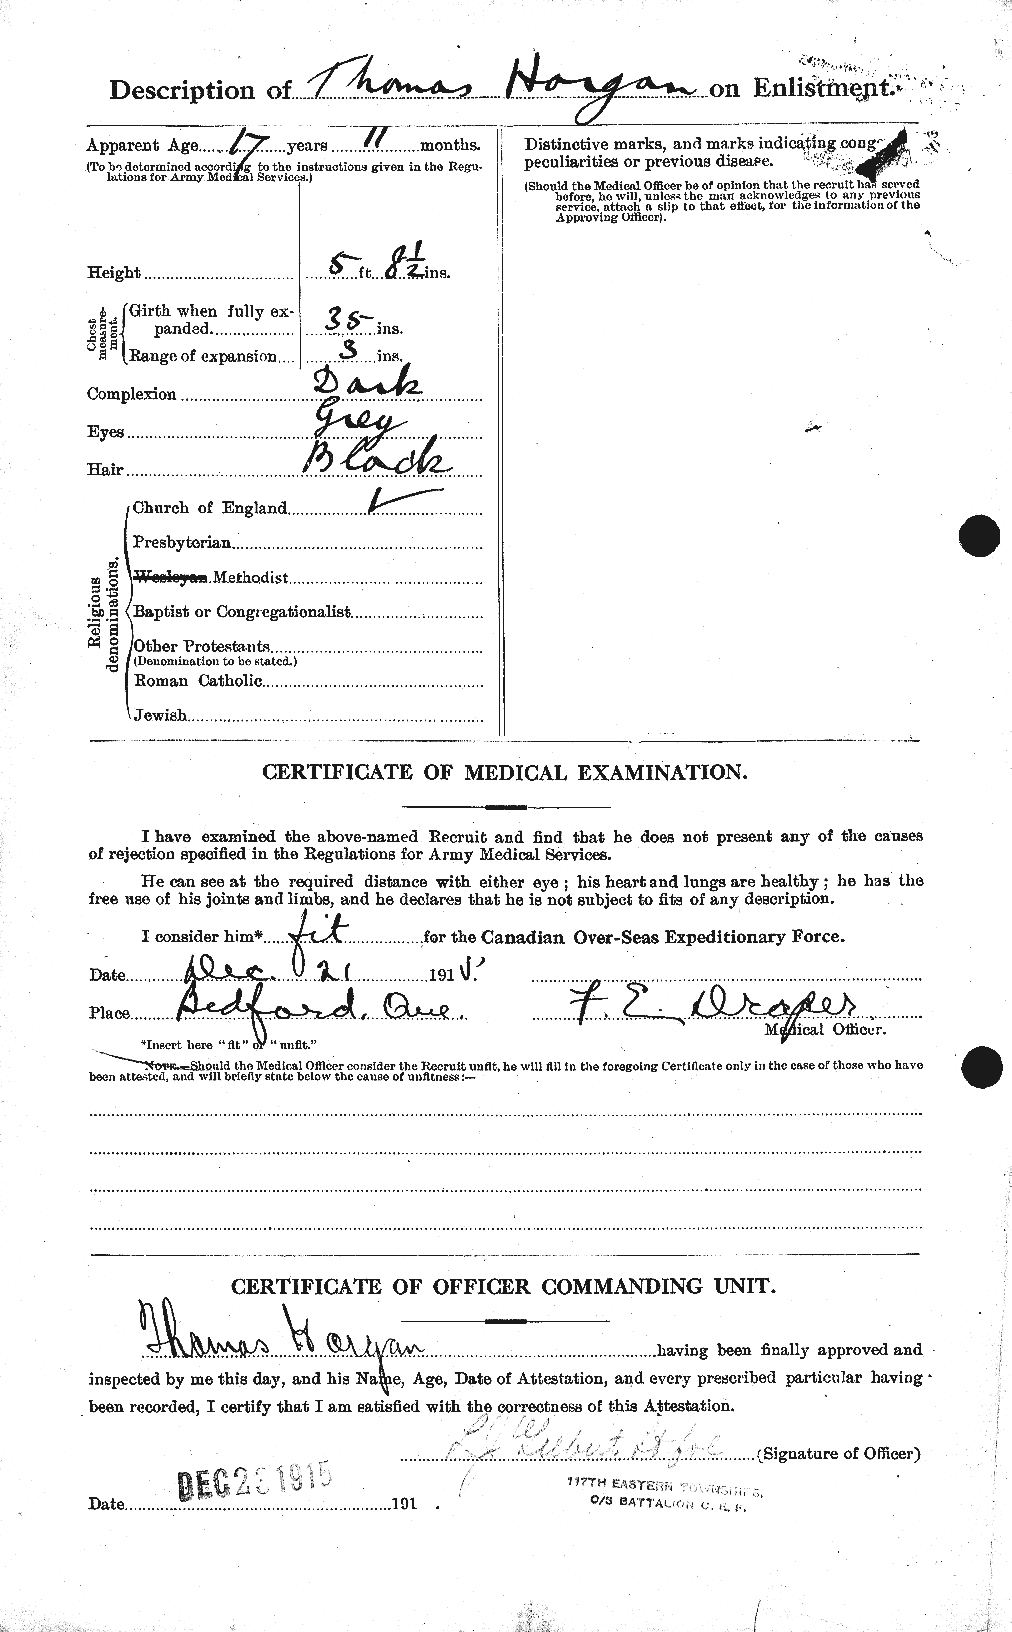 Personnel Records of the First World War - CEF 397471b